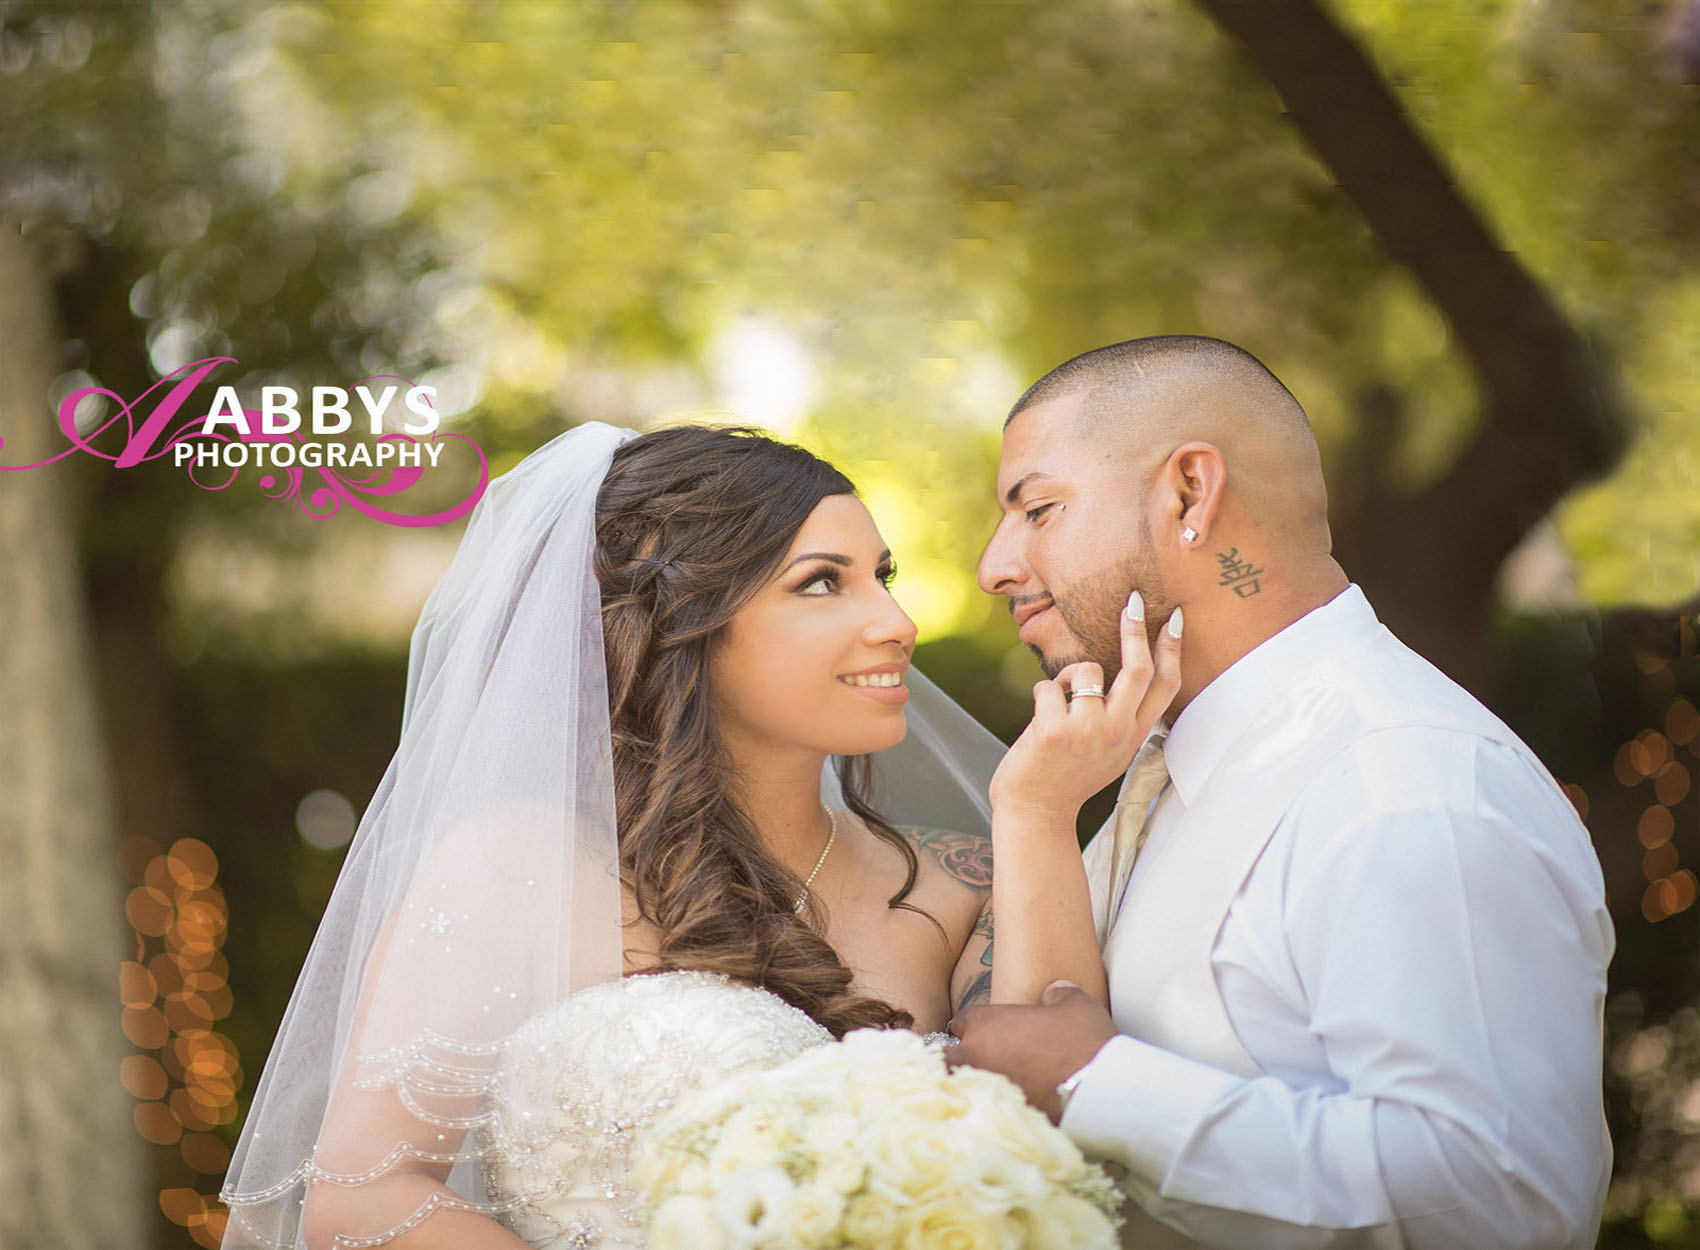 Everybody wants a happy wedding, and Abbys Photography provides the happiest wedding photography. 